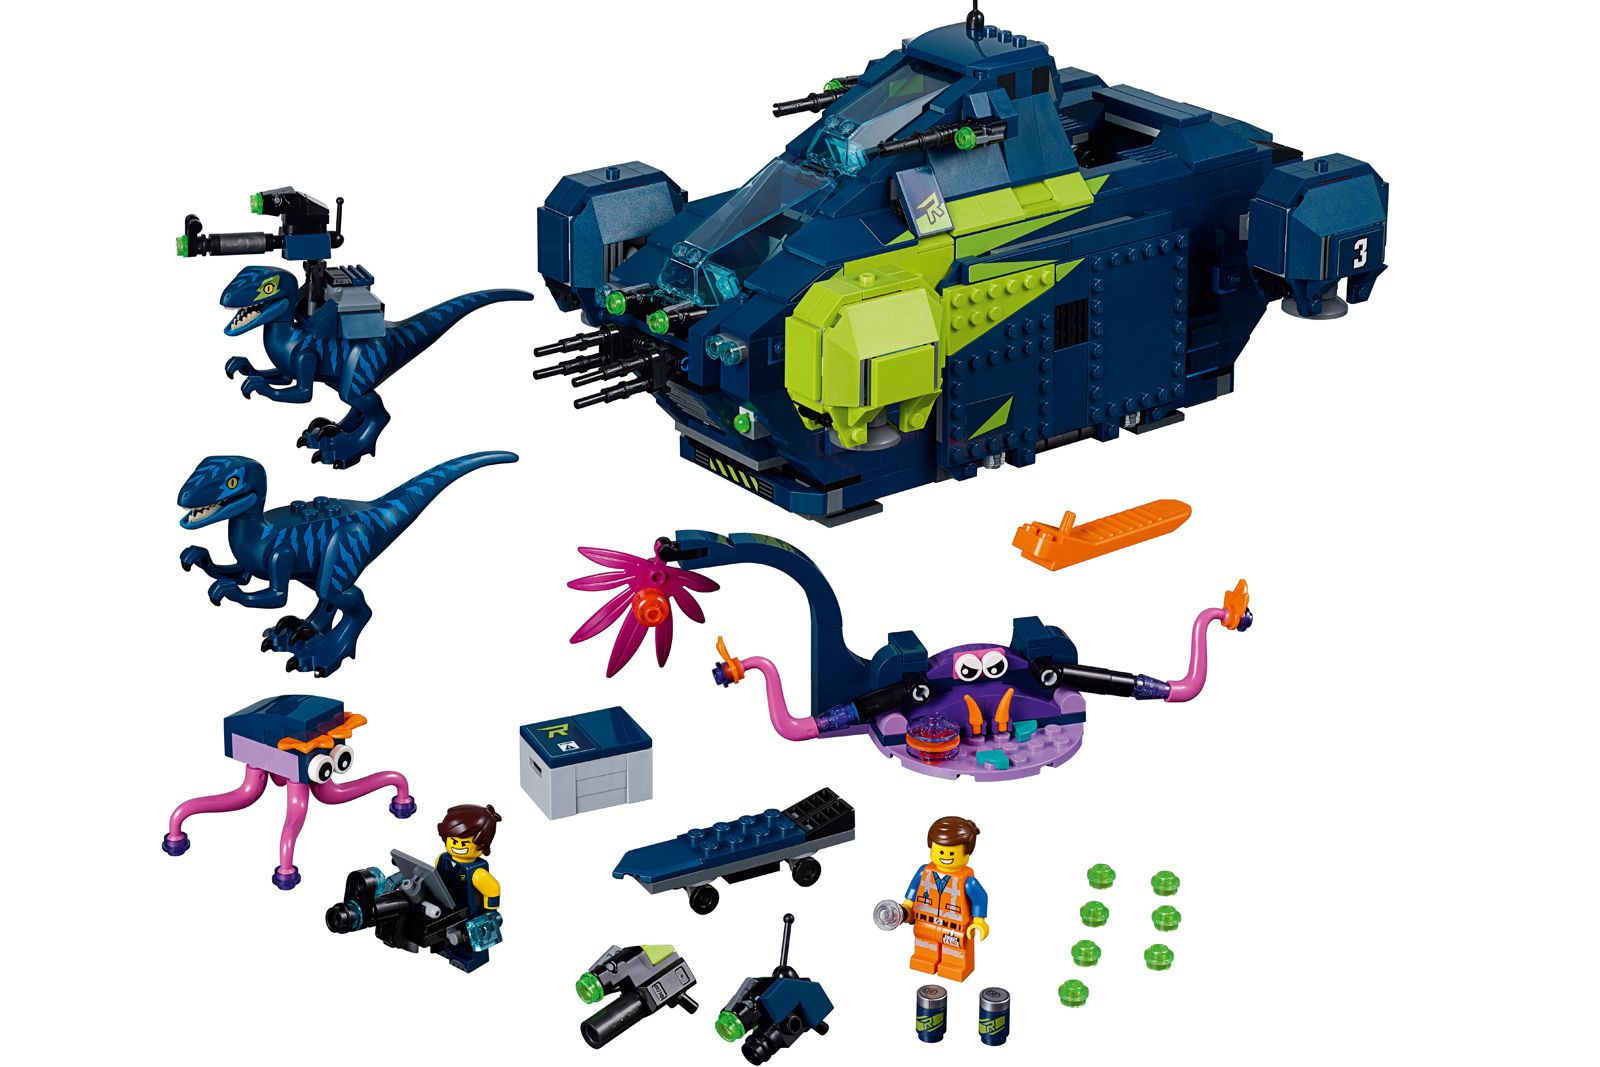 21 Lego sets from The Lego Movie 2 The Second Part - every set covered image 17